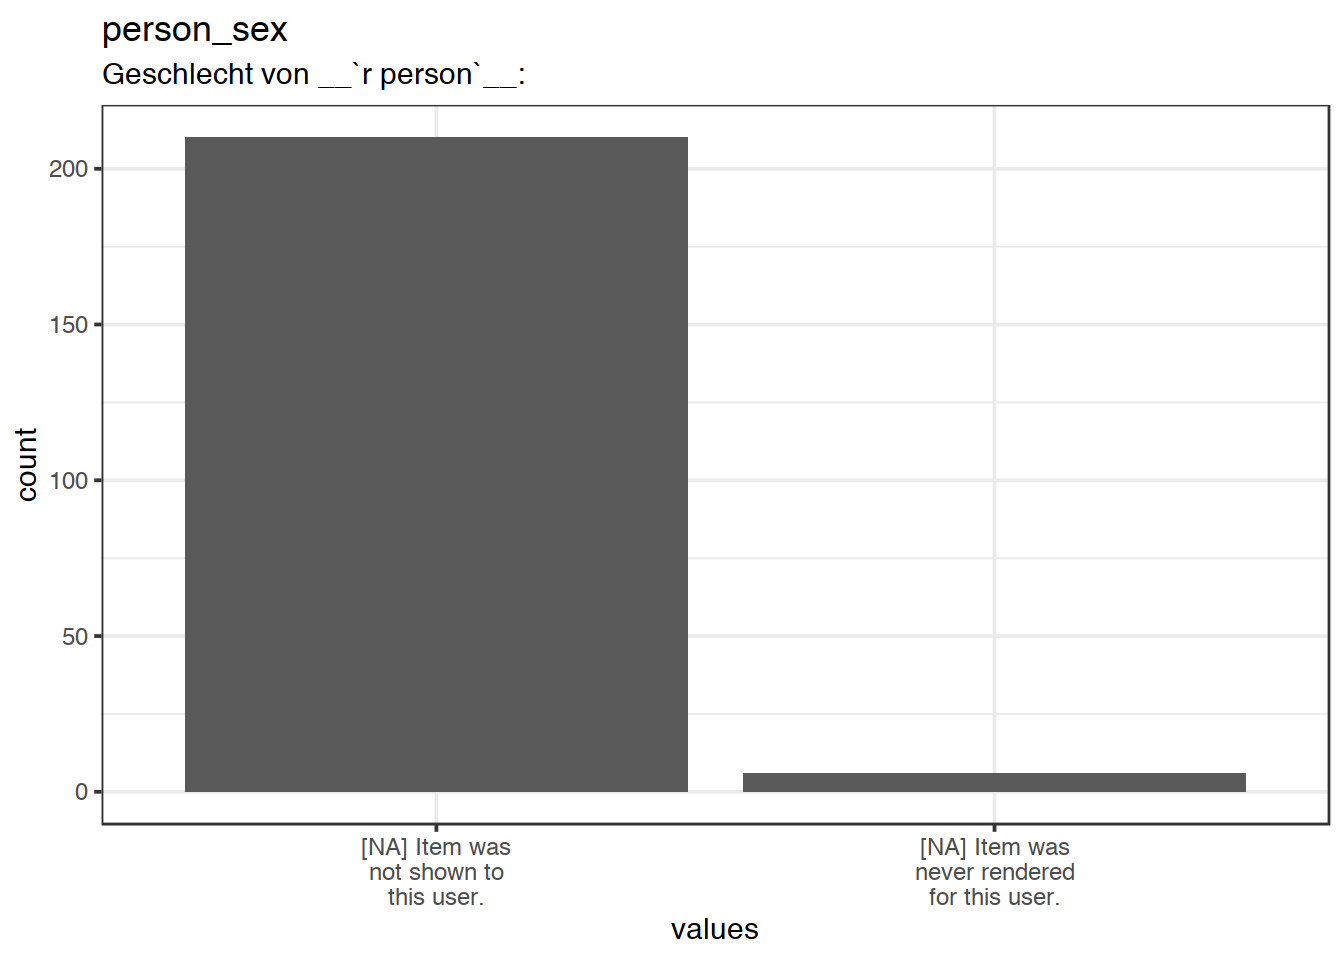 Plot of missing values for person_sex